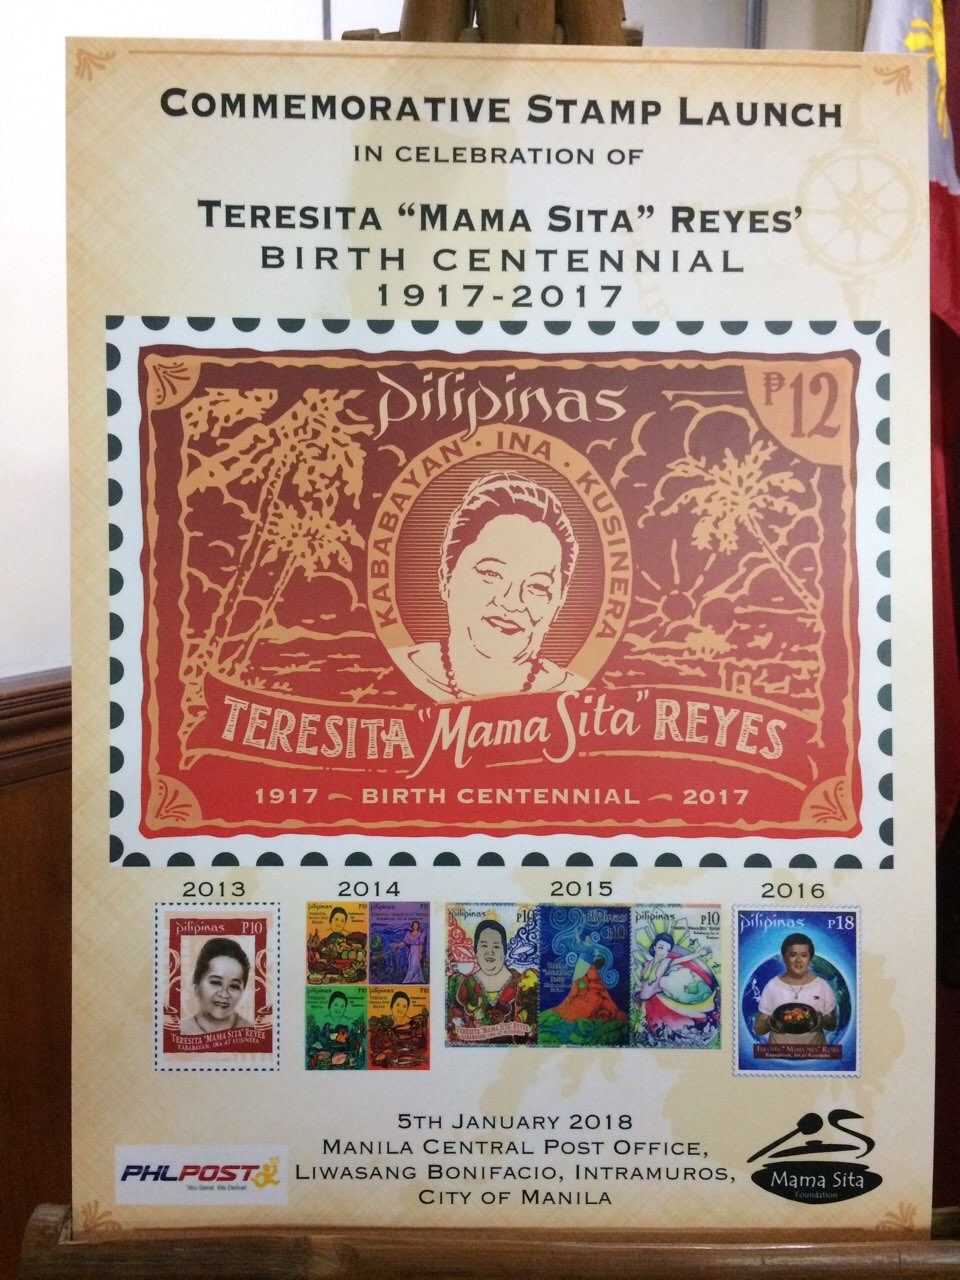 CELEBRATION. The Philpost has released limited collections of Mama Sita stamps since 2013 